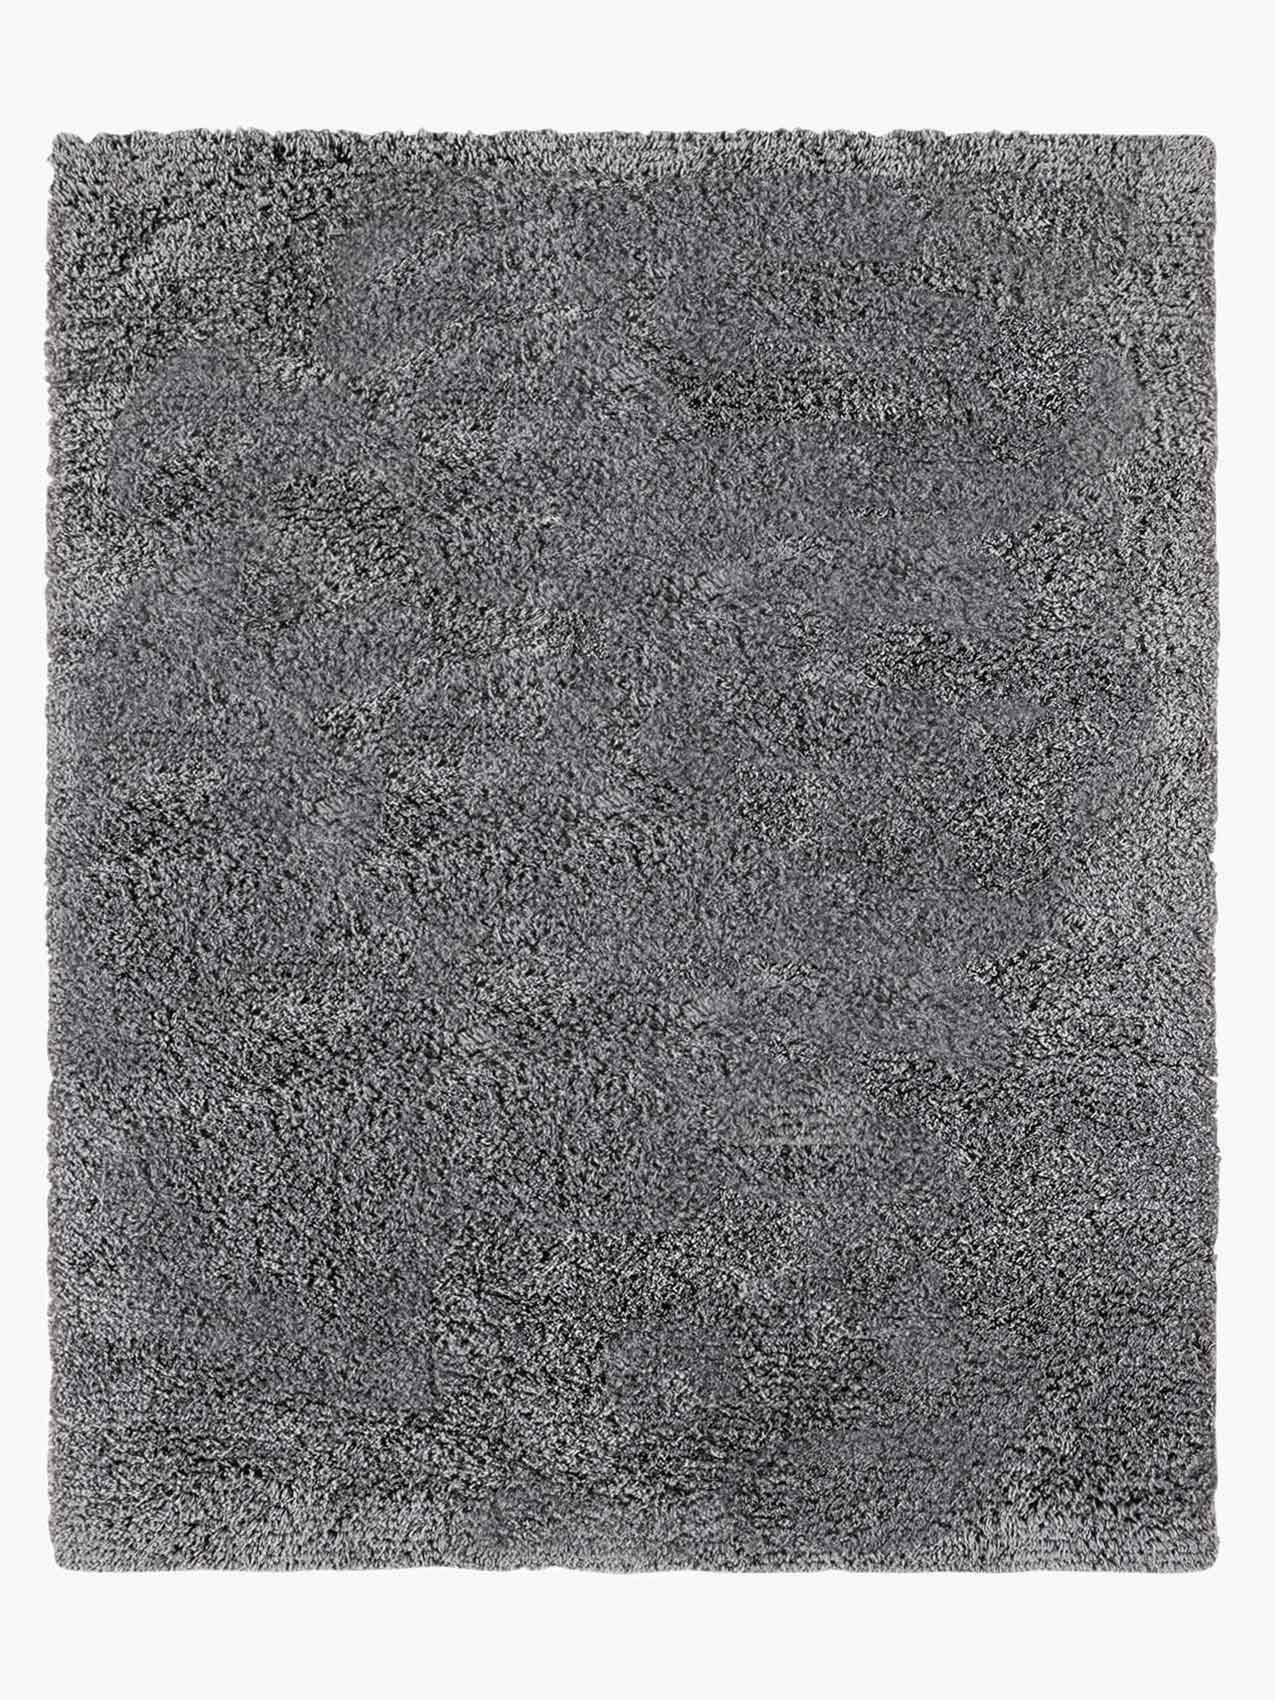 For Sale: Gray (Nickel/Carbon) Ben Soleimani Performance Shag Rug– Hand-woven Ultra-plush 6'x9'